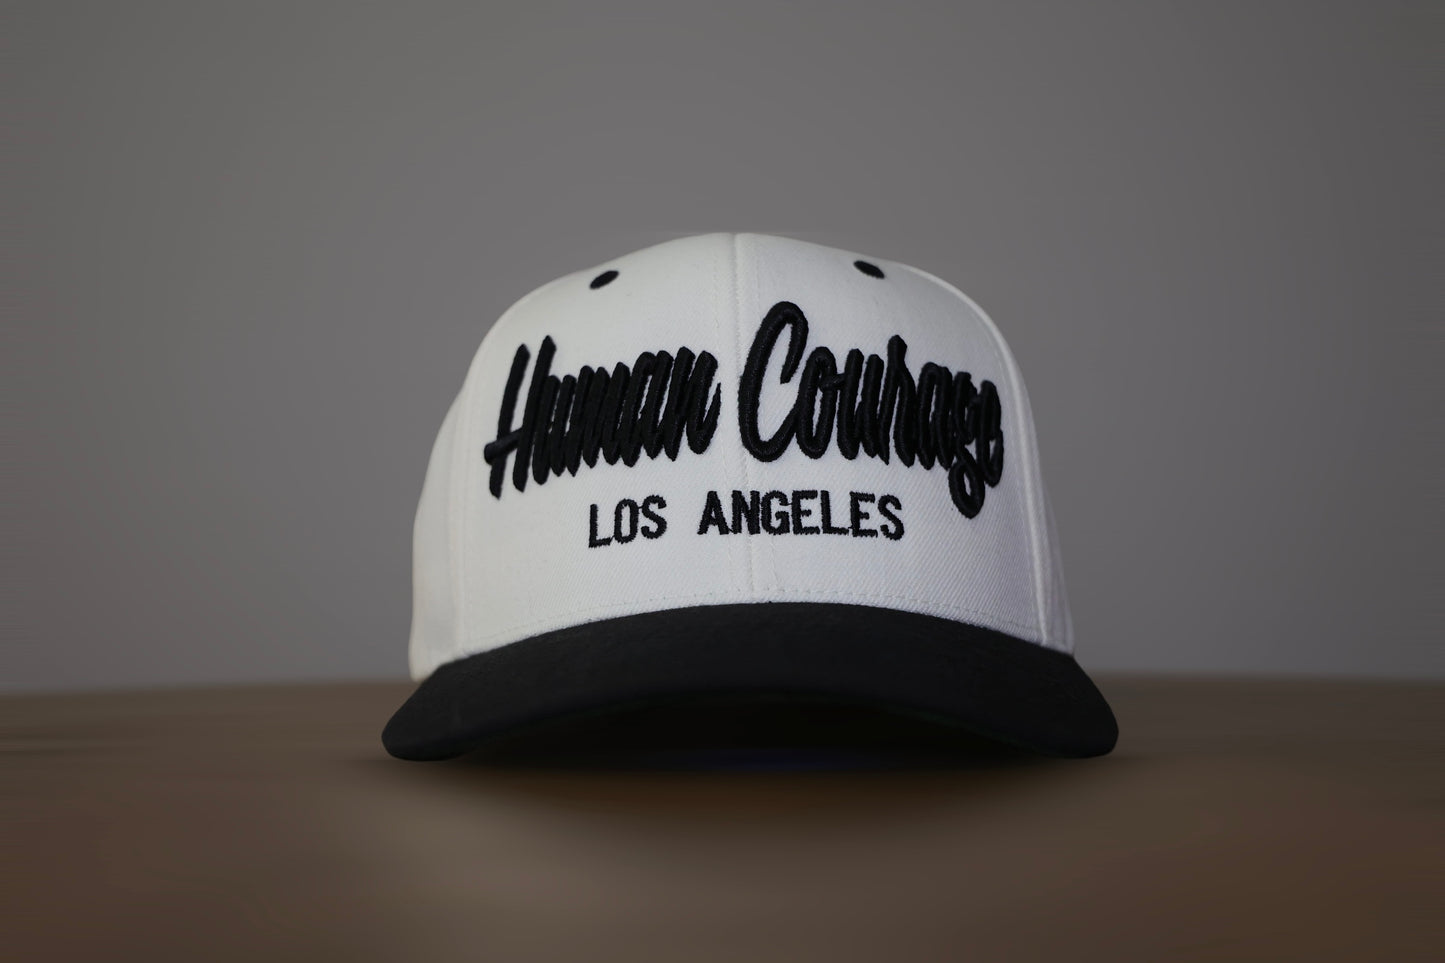 Human Courage CREAM Snap Back Hat